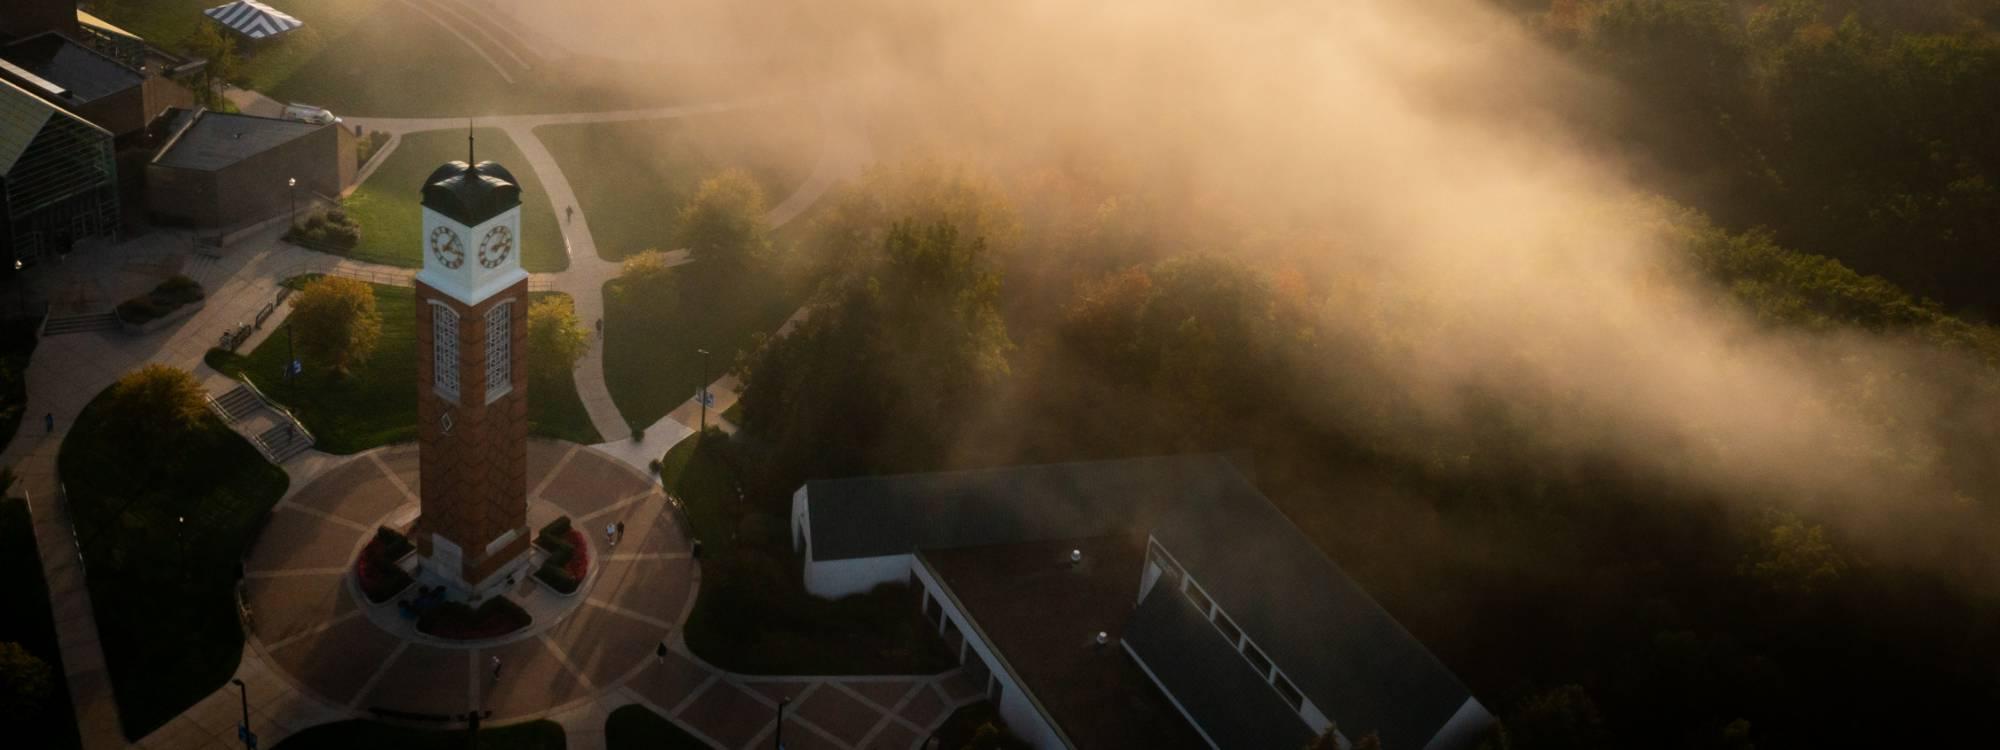 An aerial photo of the Allendale campus shows the clock tower and Cook DeWitt Center as fog rises above the ravines.